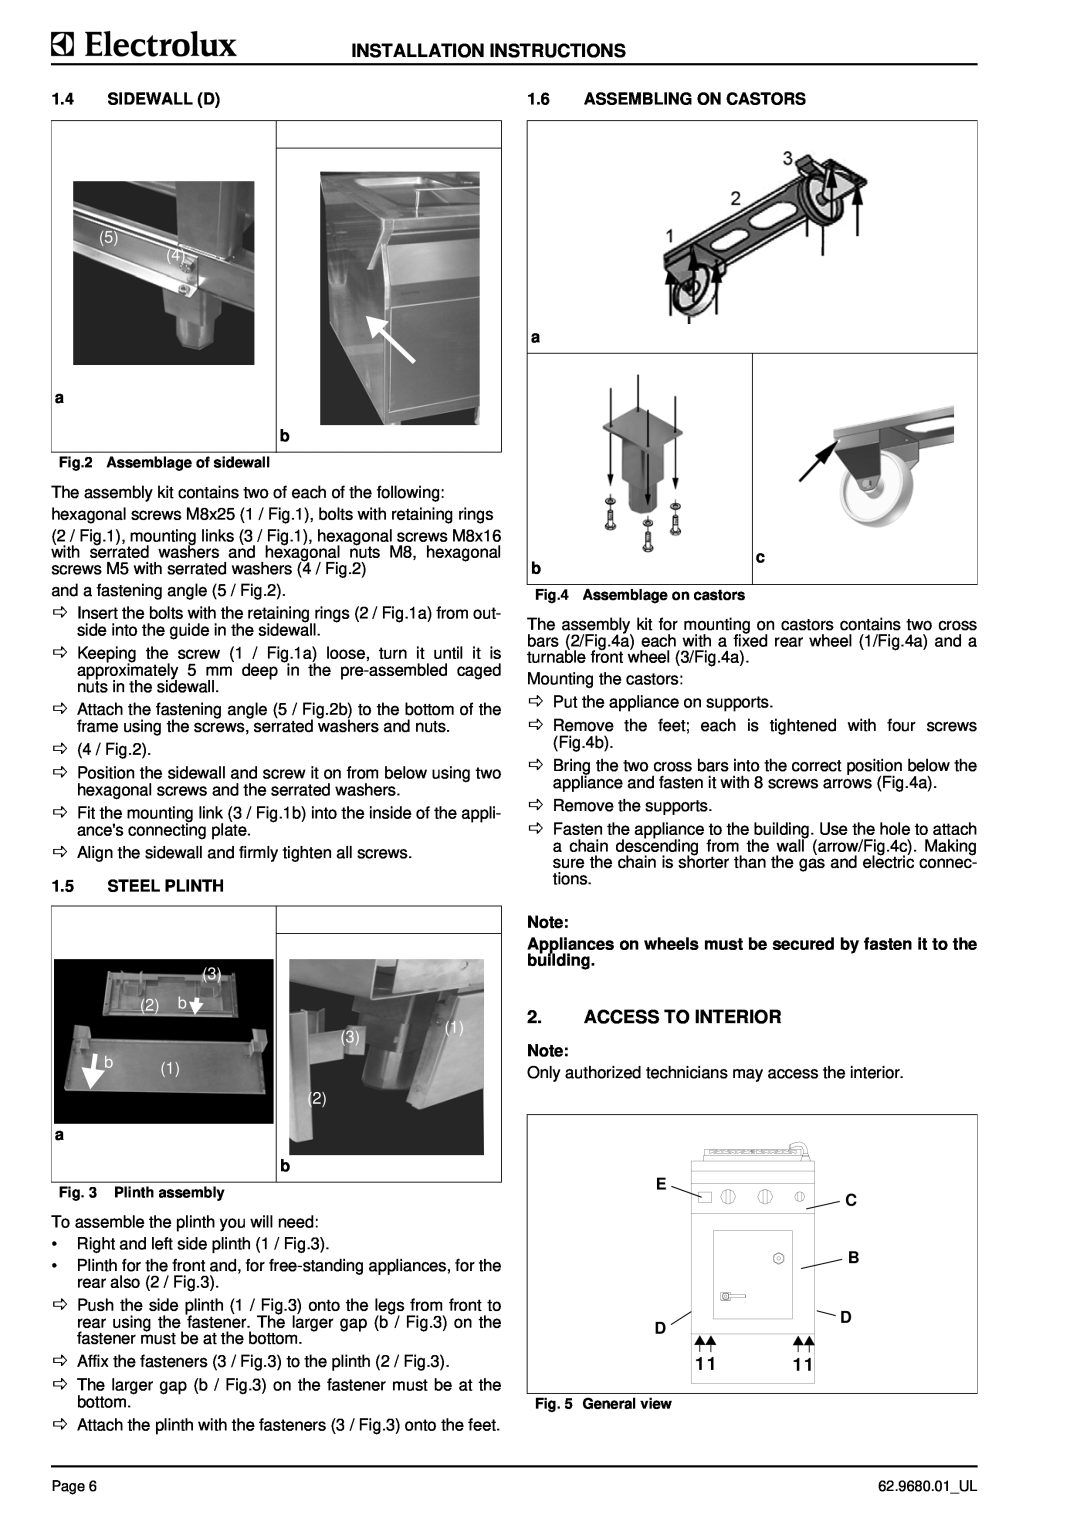 Electrolux WKGROFOOOO Installation Instructions, Access To Interior, Sidewall D, Assembling On Castors, 1.5STEEL PLINTH 